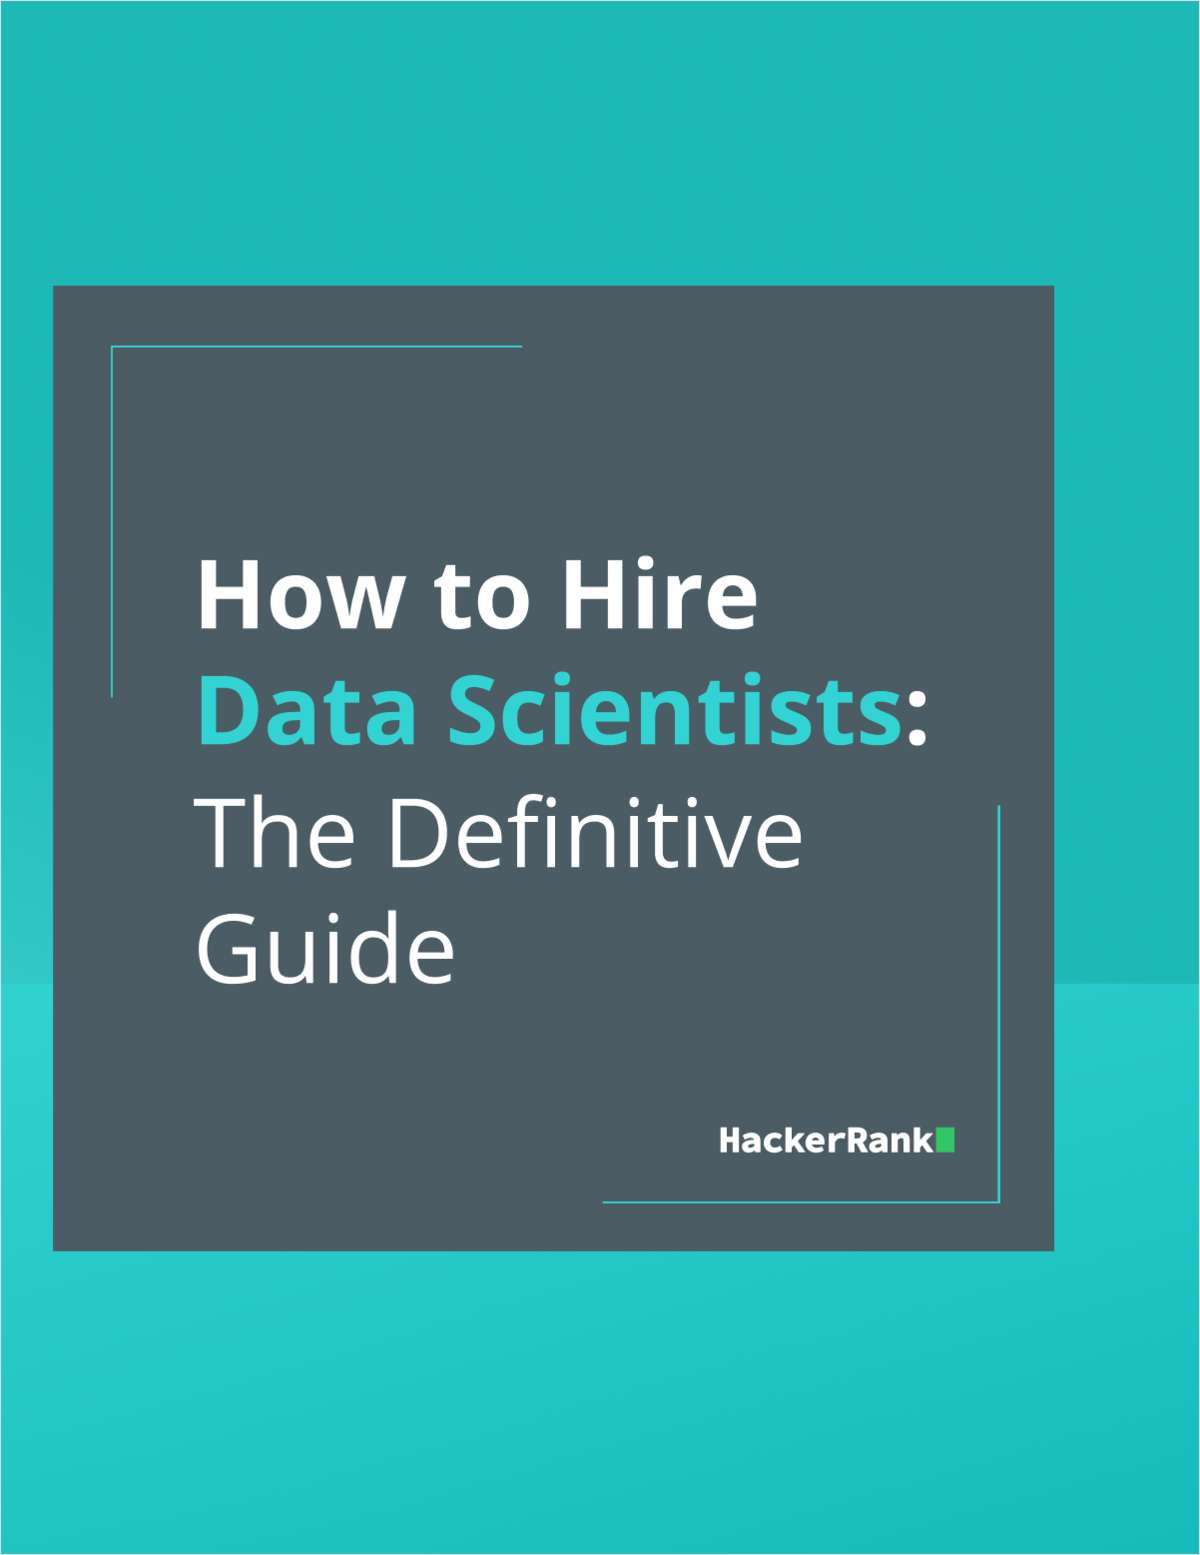 How to Hire Data Scientists: The Definitive Guide